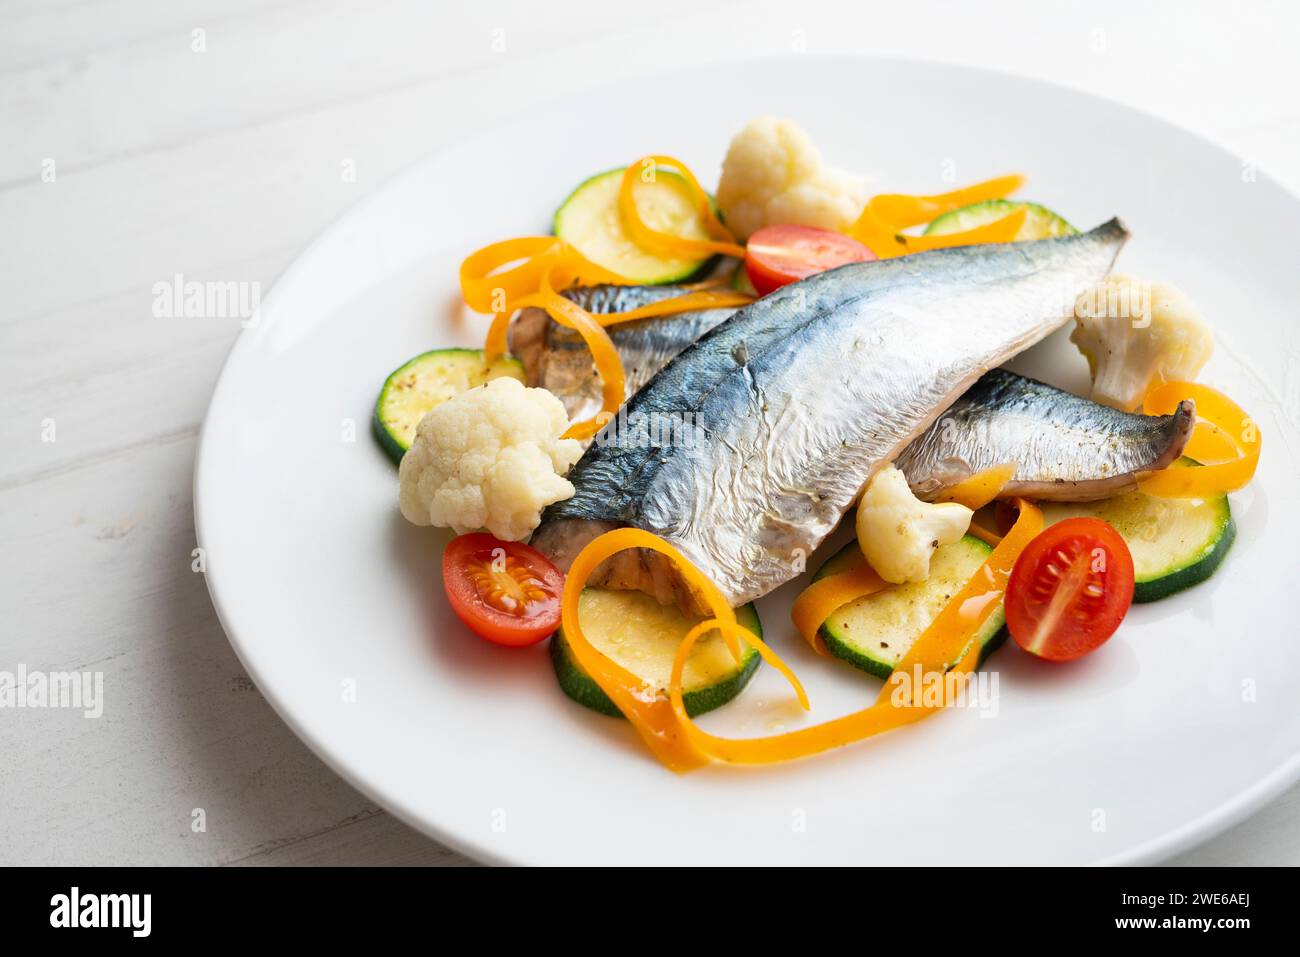 Baked mackerel with steamed vegetables Stock Photo